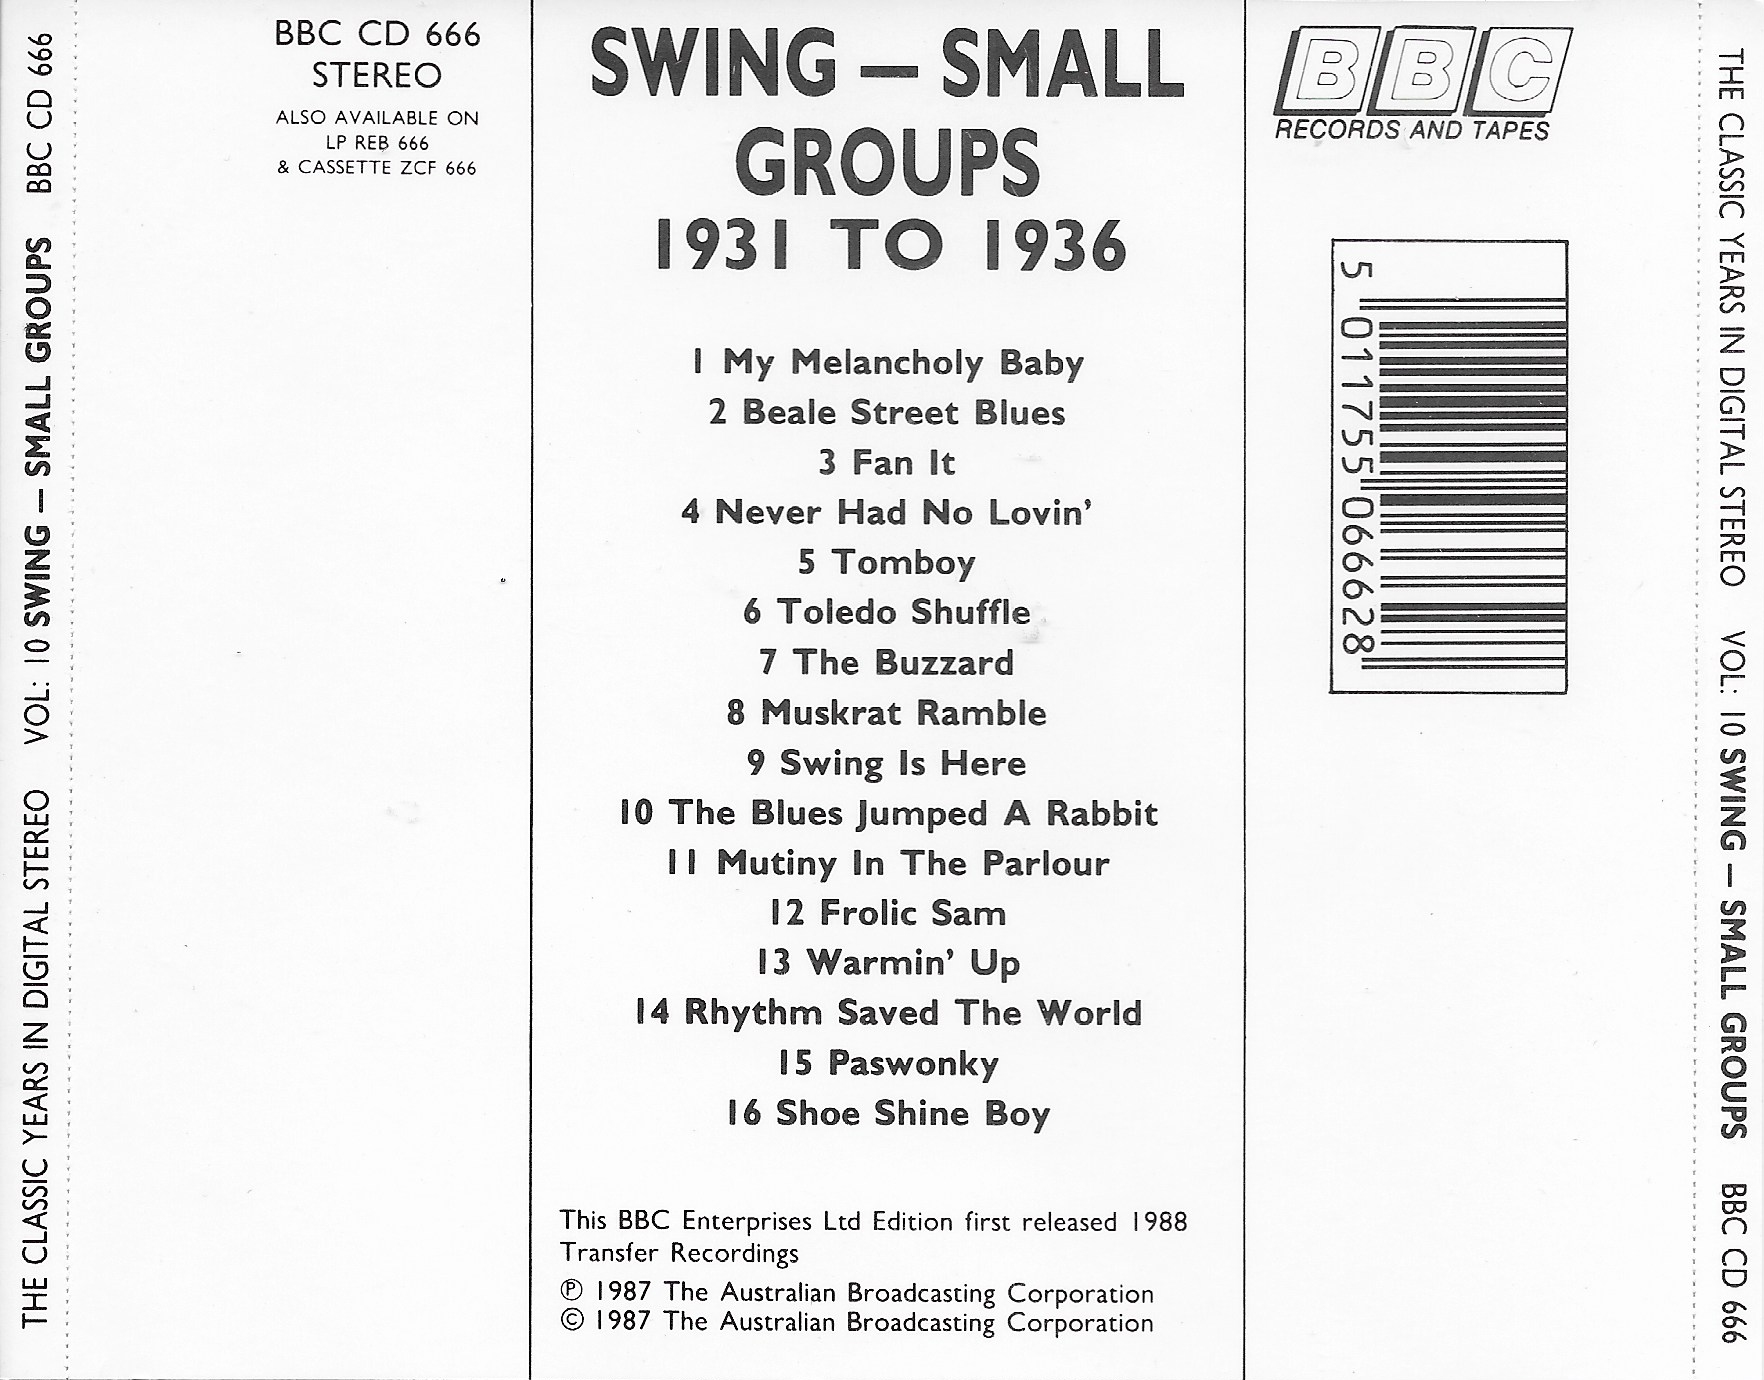 Picture of BBCCD666 Classic years - Volume 10, Swing small groups by artist Various from the BBC records and Tapes library